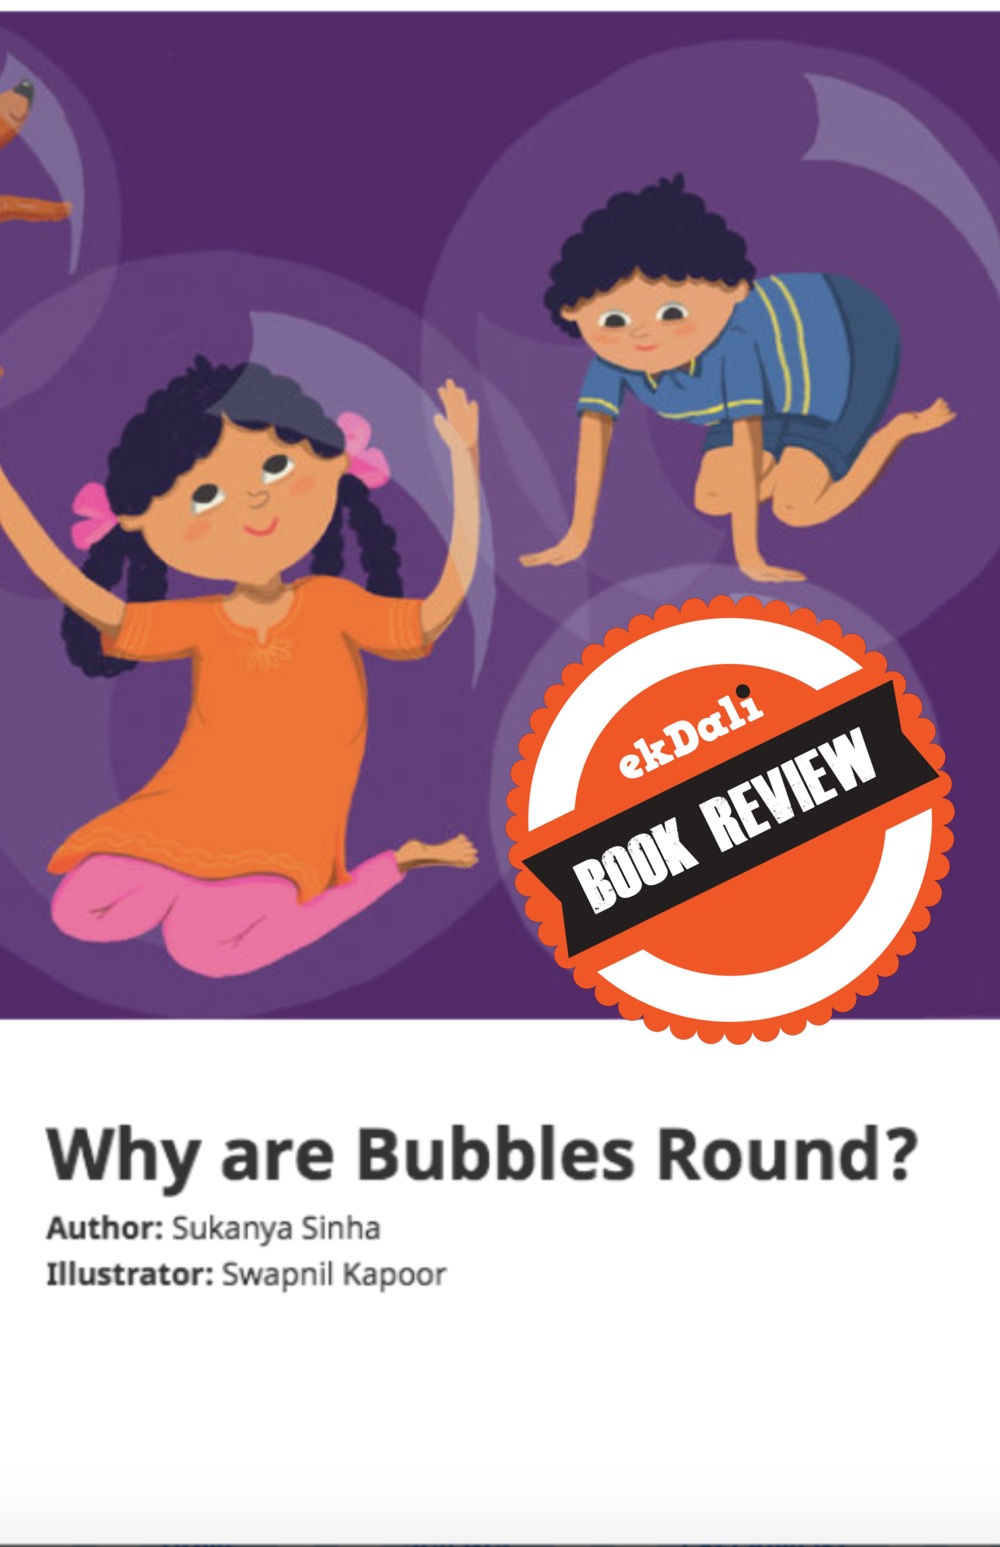 Book Review: Why are Bubbles Round?